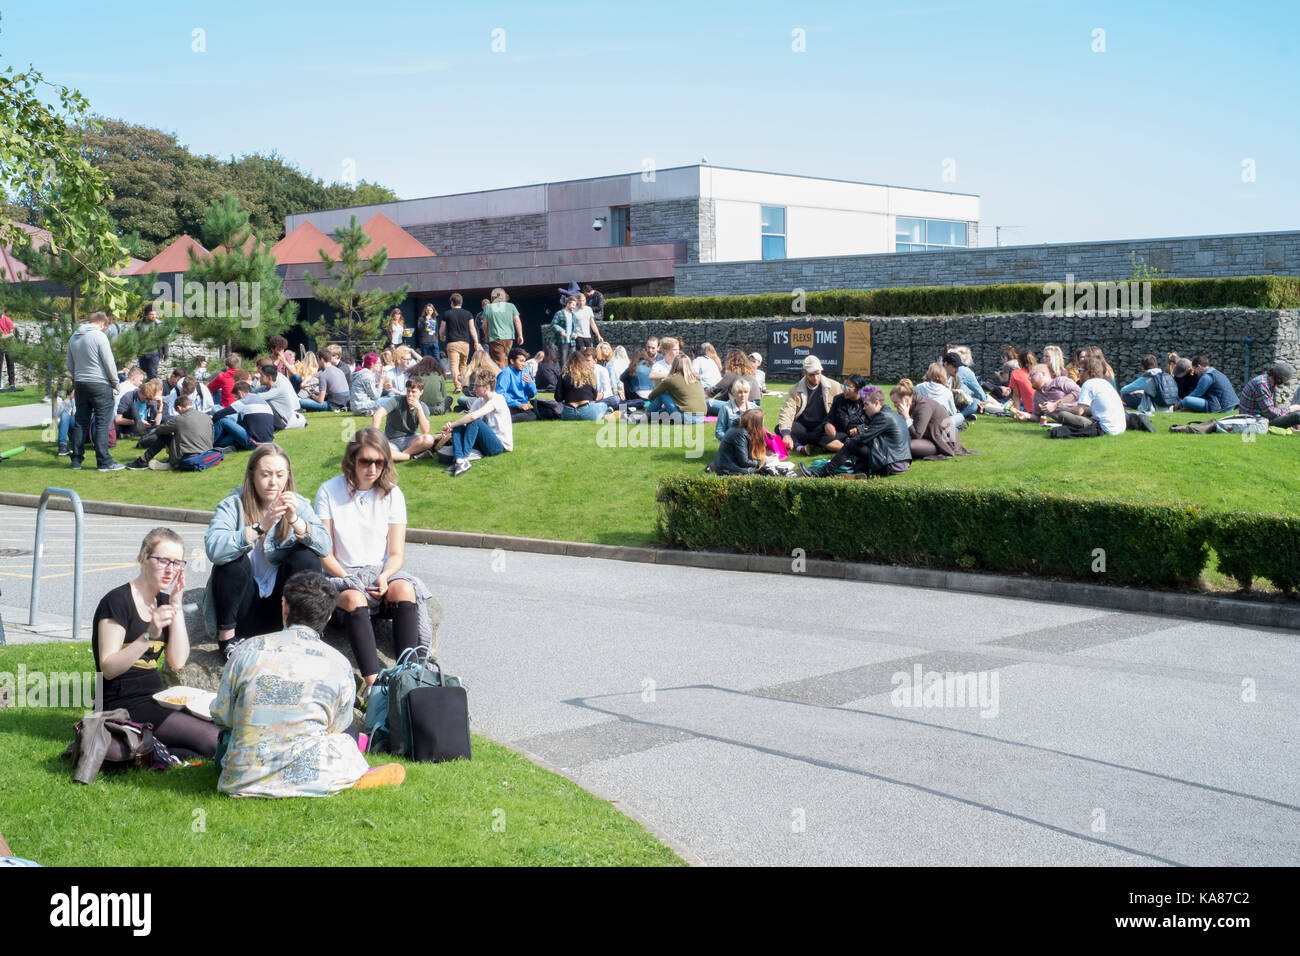 Cornwall, UK. 25th Sep, 2017. UK Weather. Students converge on the green areas of Falmouth University's Tremough Campus at lunch time to enjoy the sunshine as a new academic year gets underway Credit: Mick Buston/Alamy Live News Stock Photo